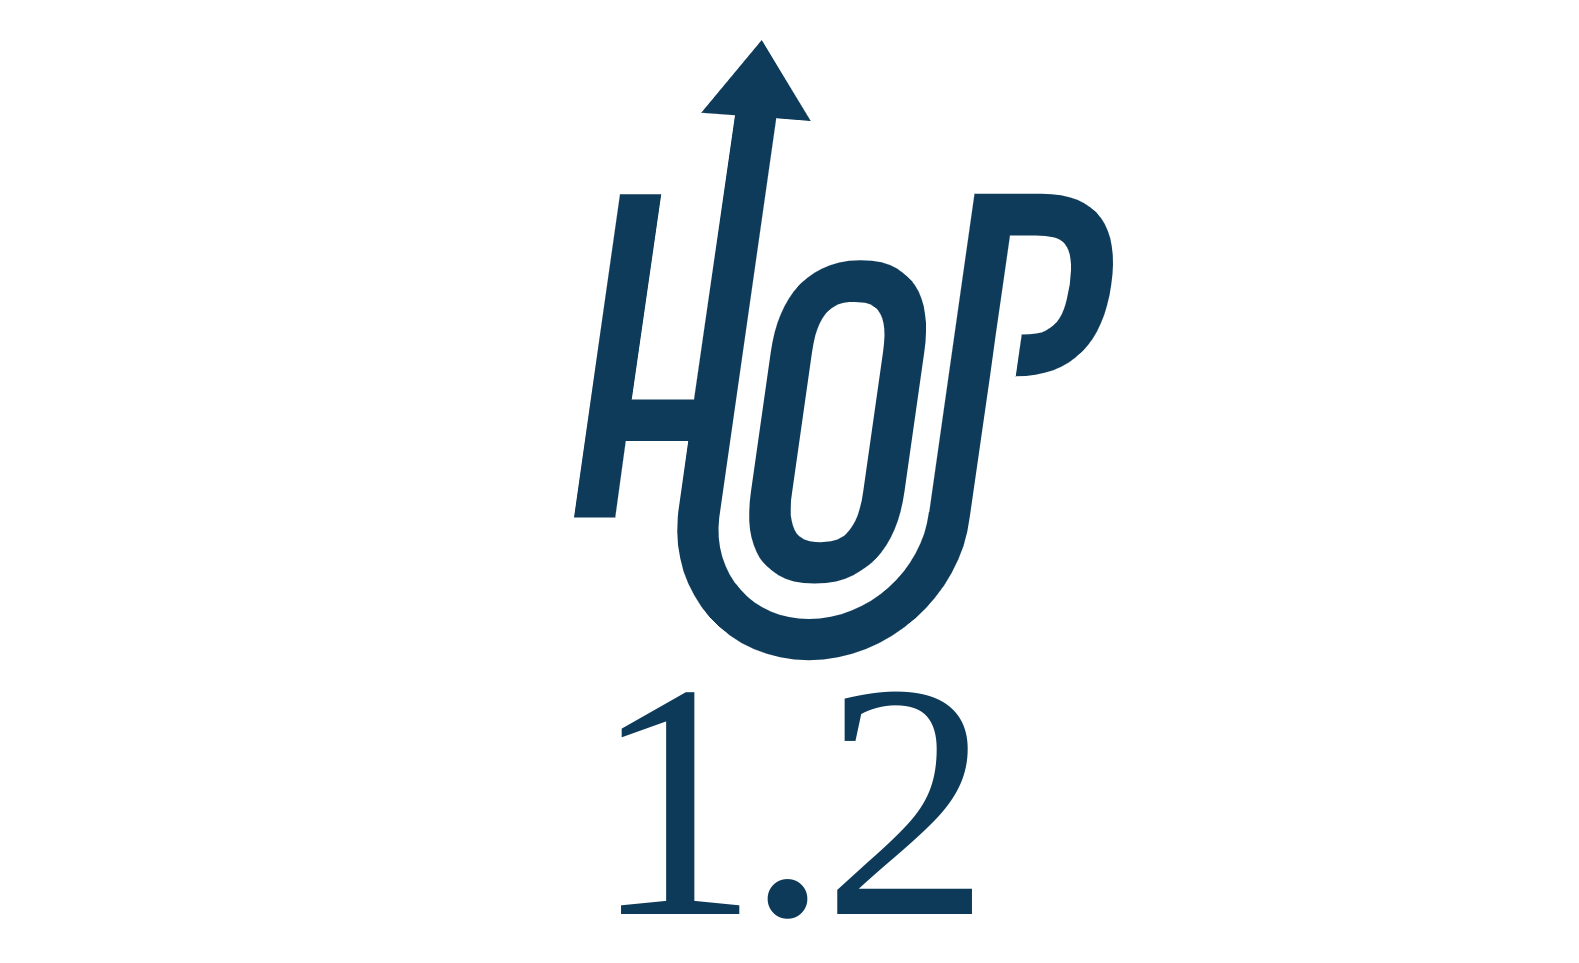 Apache Hop 1.2.0 Released!